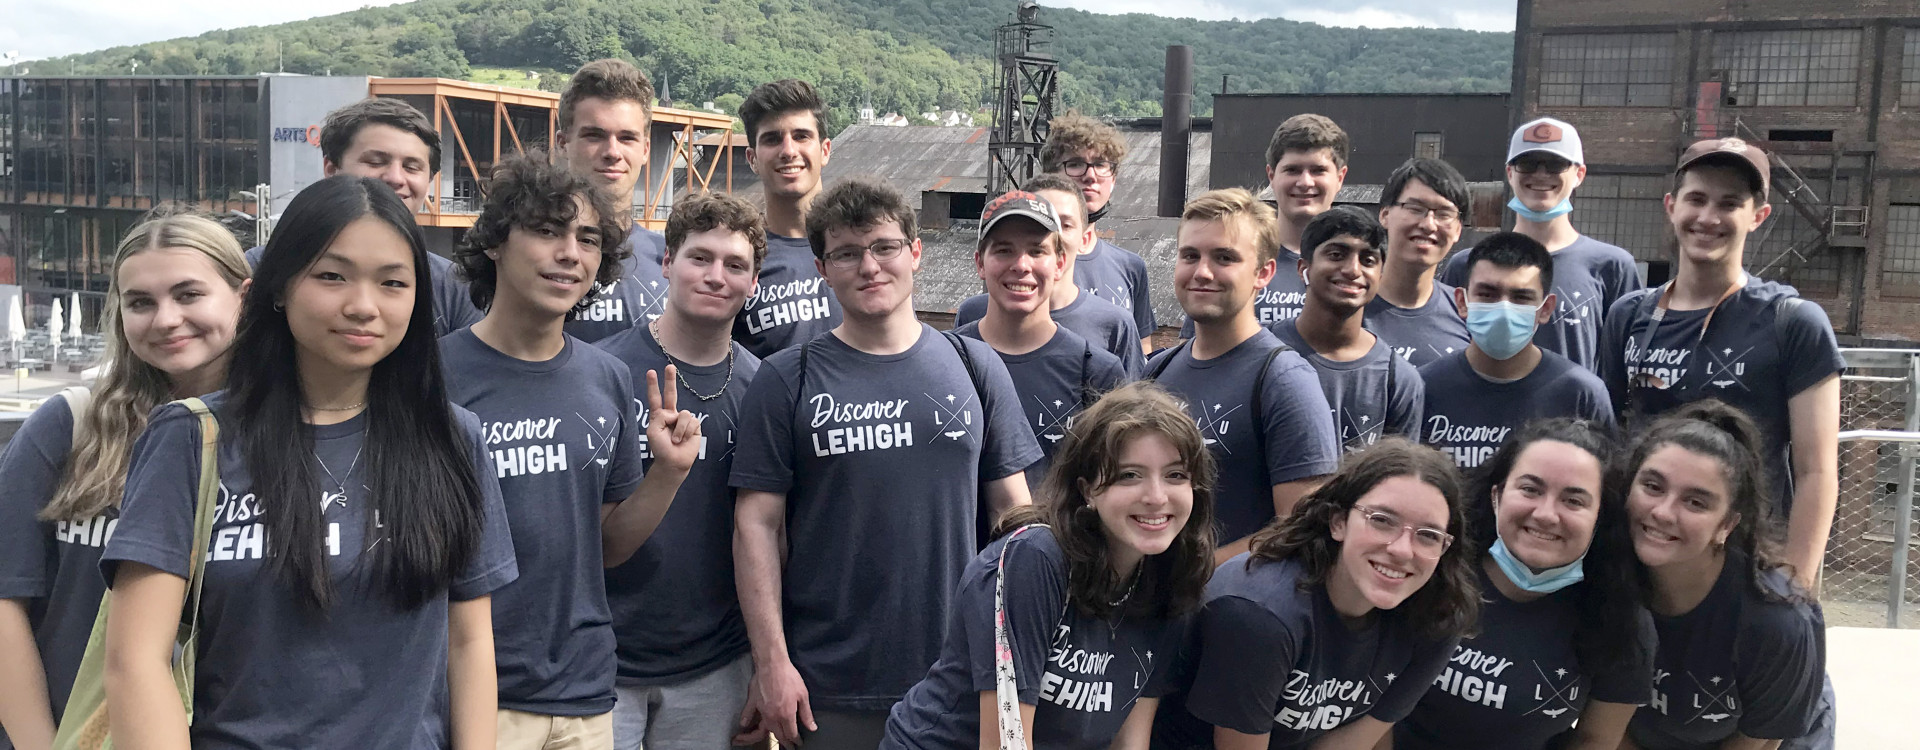 Discover Lehigh students